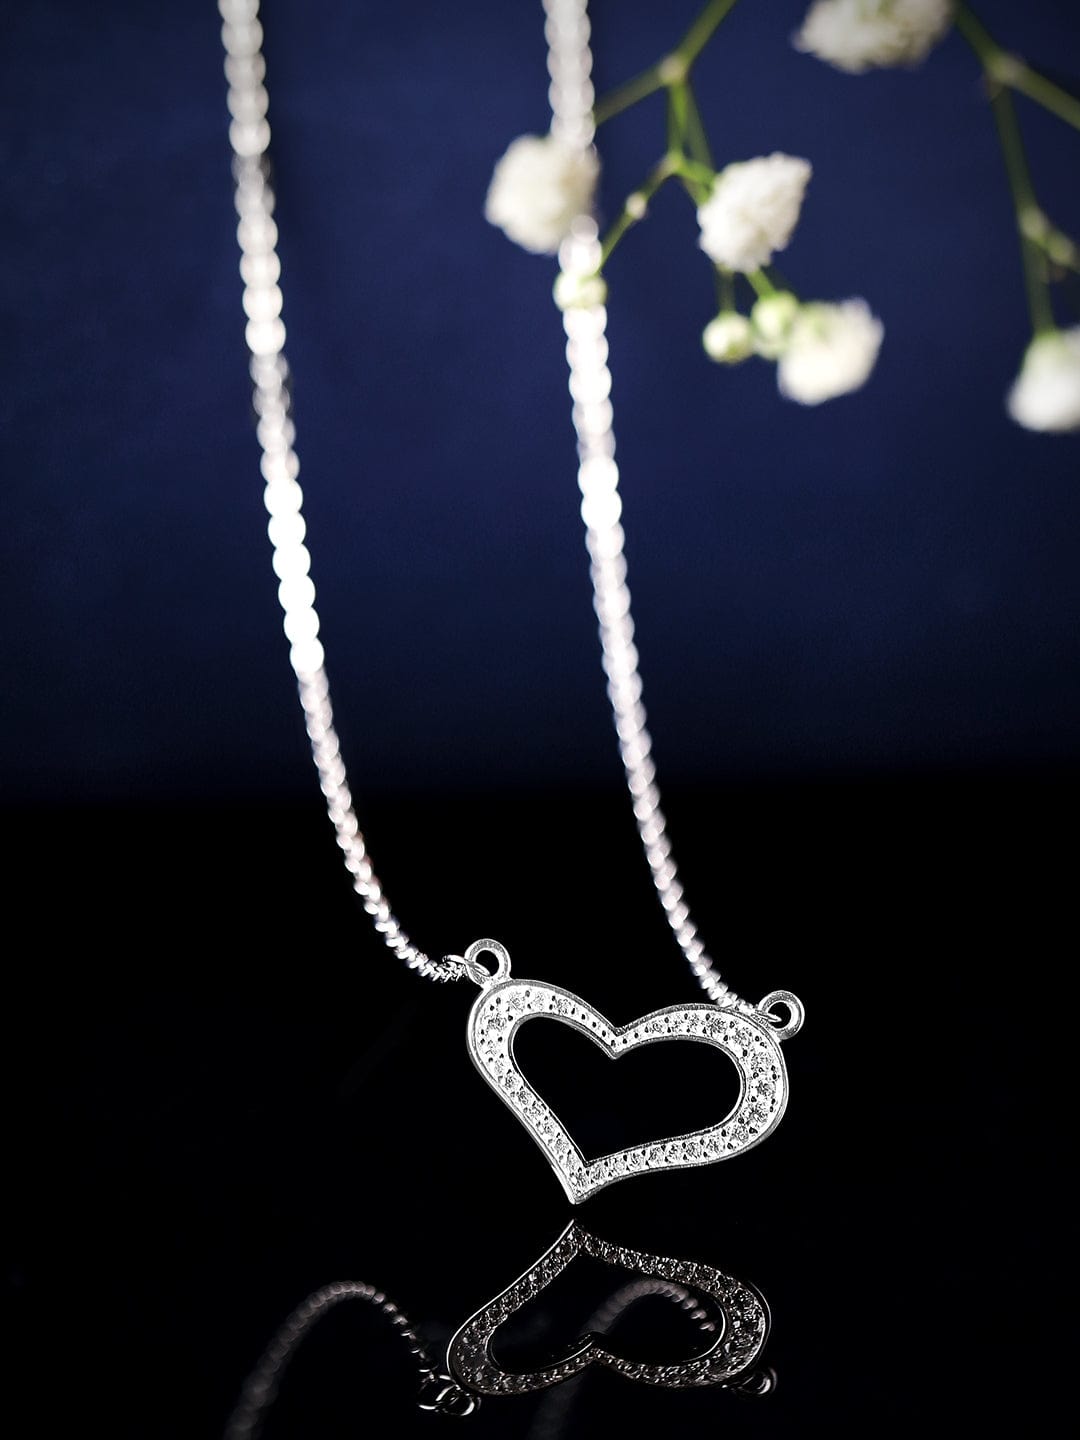 Take Your Heart With You Wherever You Go - Necklace Earrings